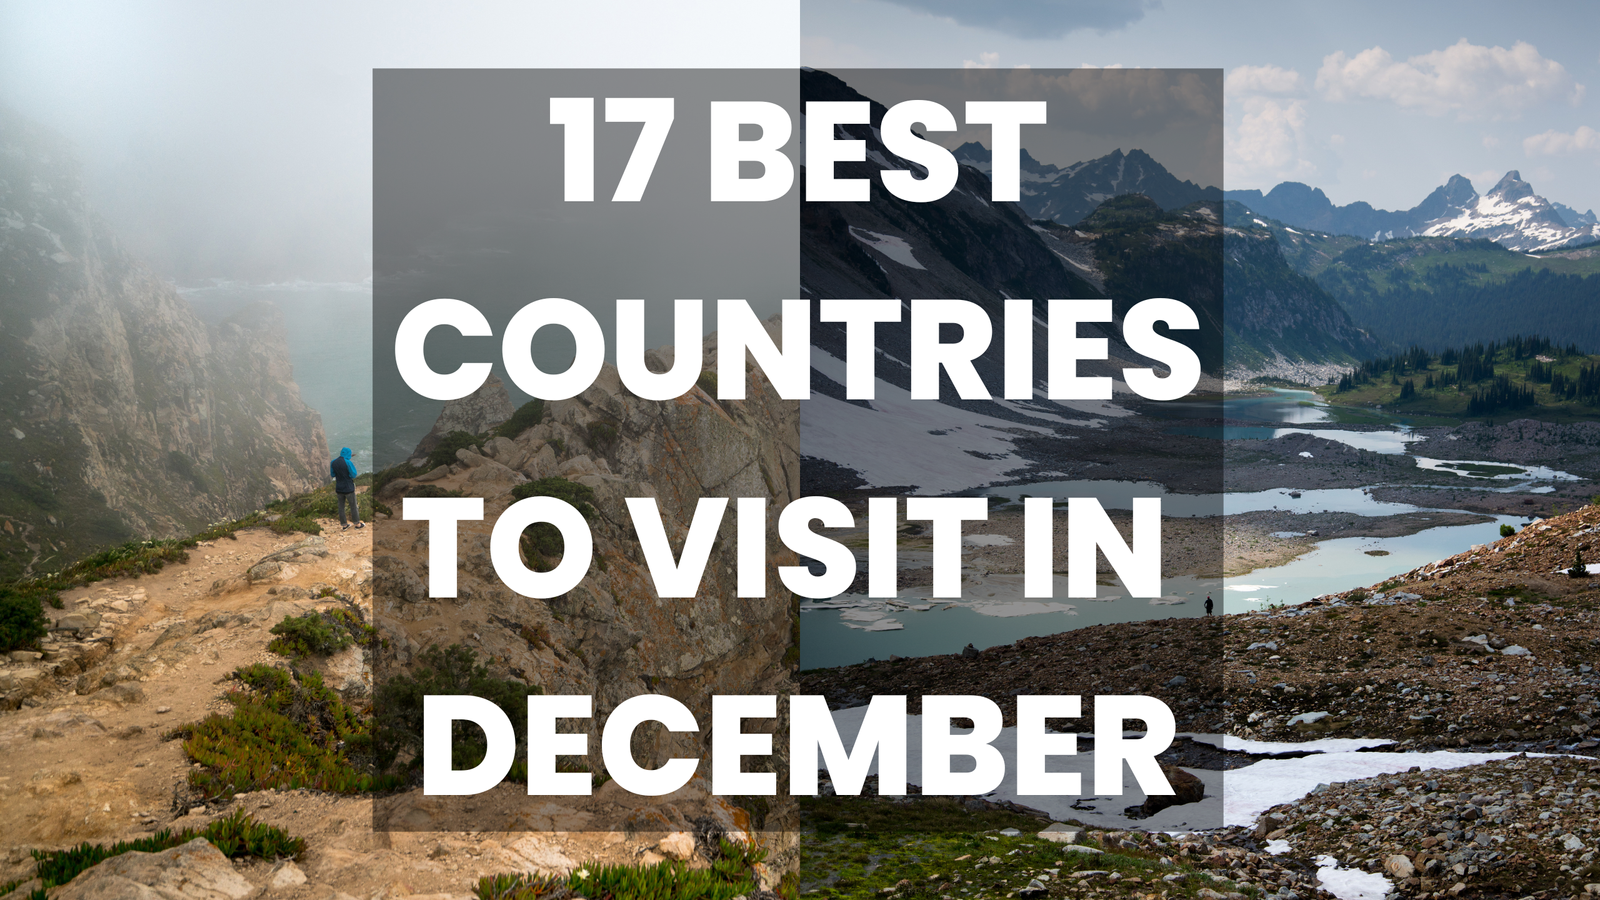 17 Best Countries to visit in December